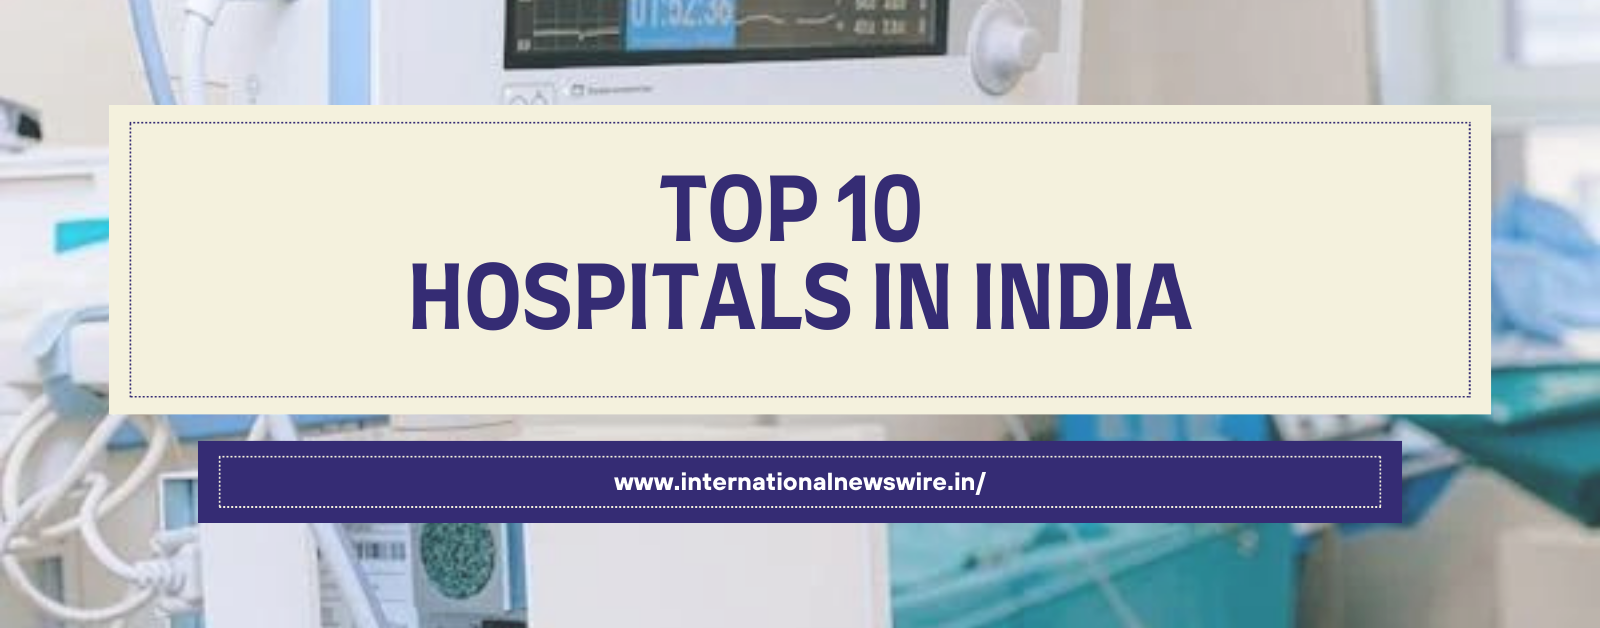 Top 10 Hospitals in India